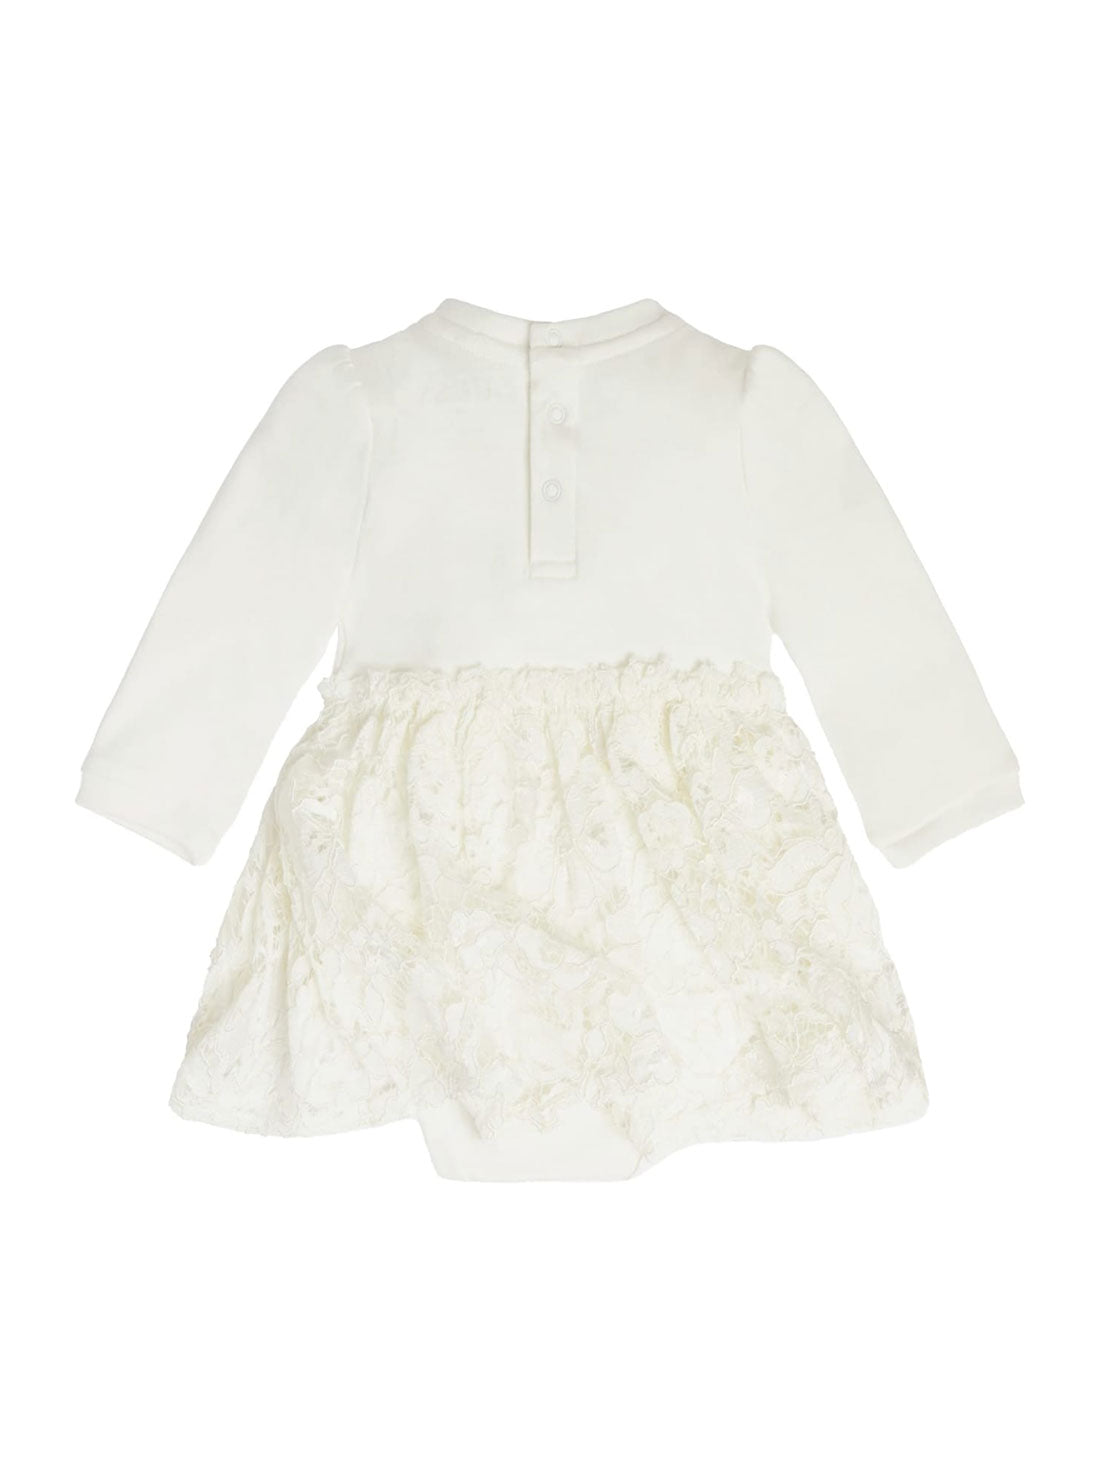 GUESS White Long Sleeve Dress (3-12M) back view